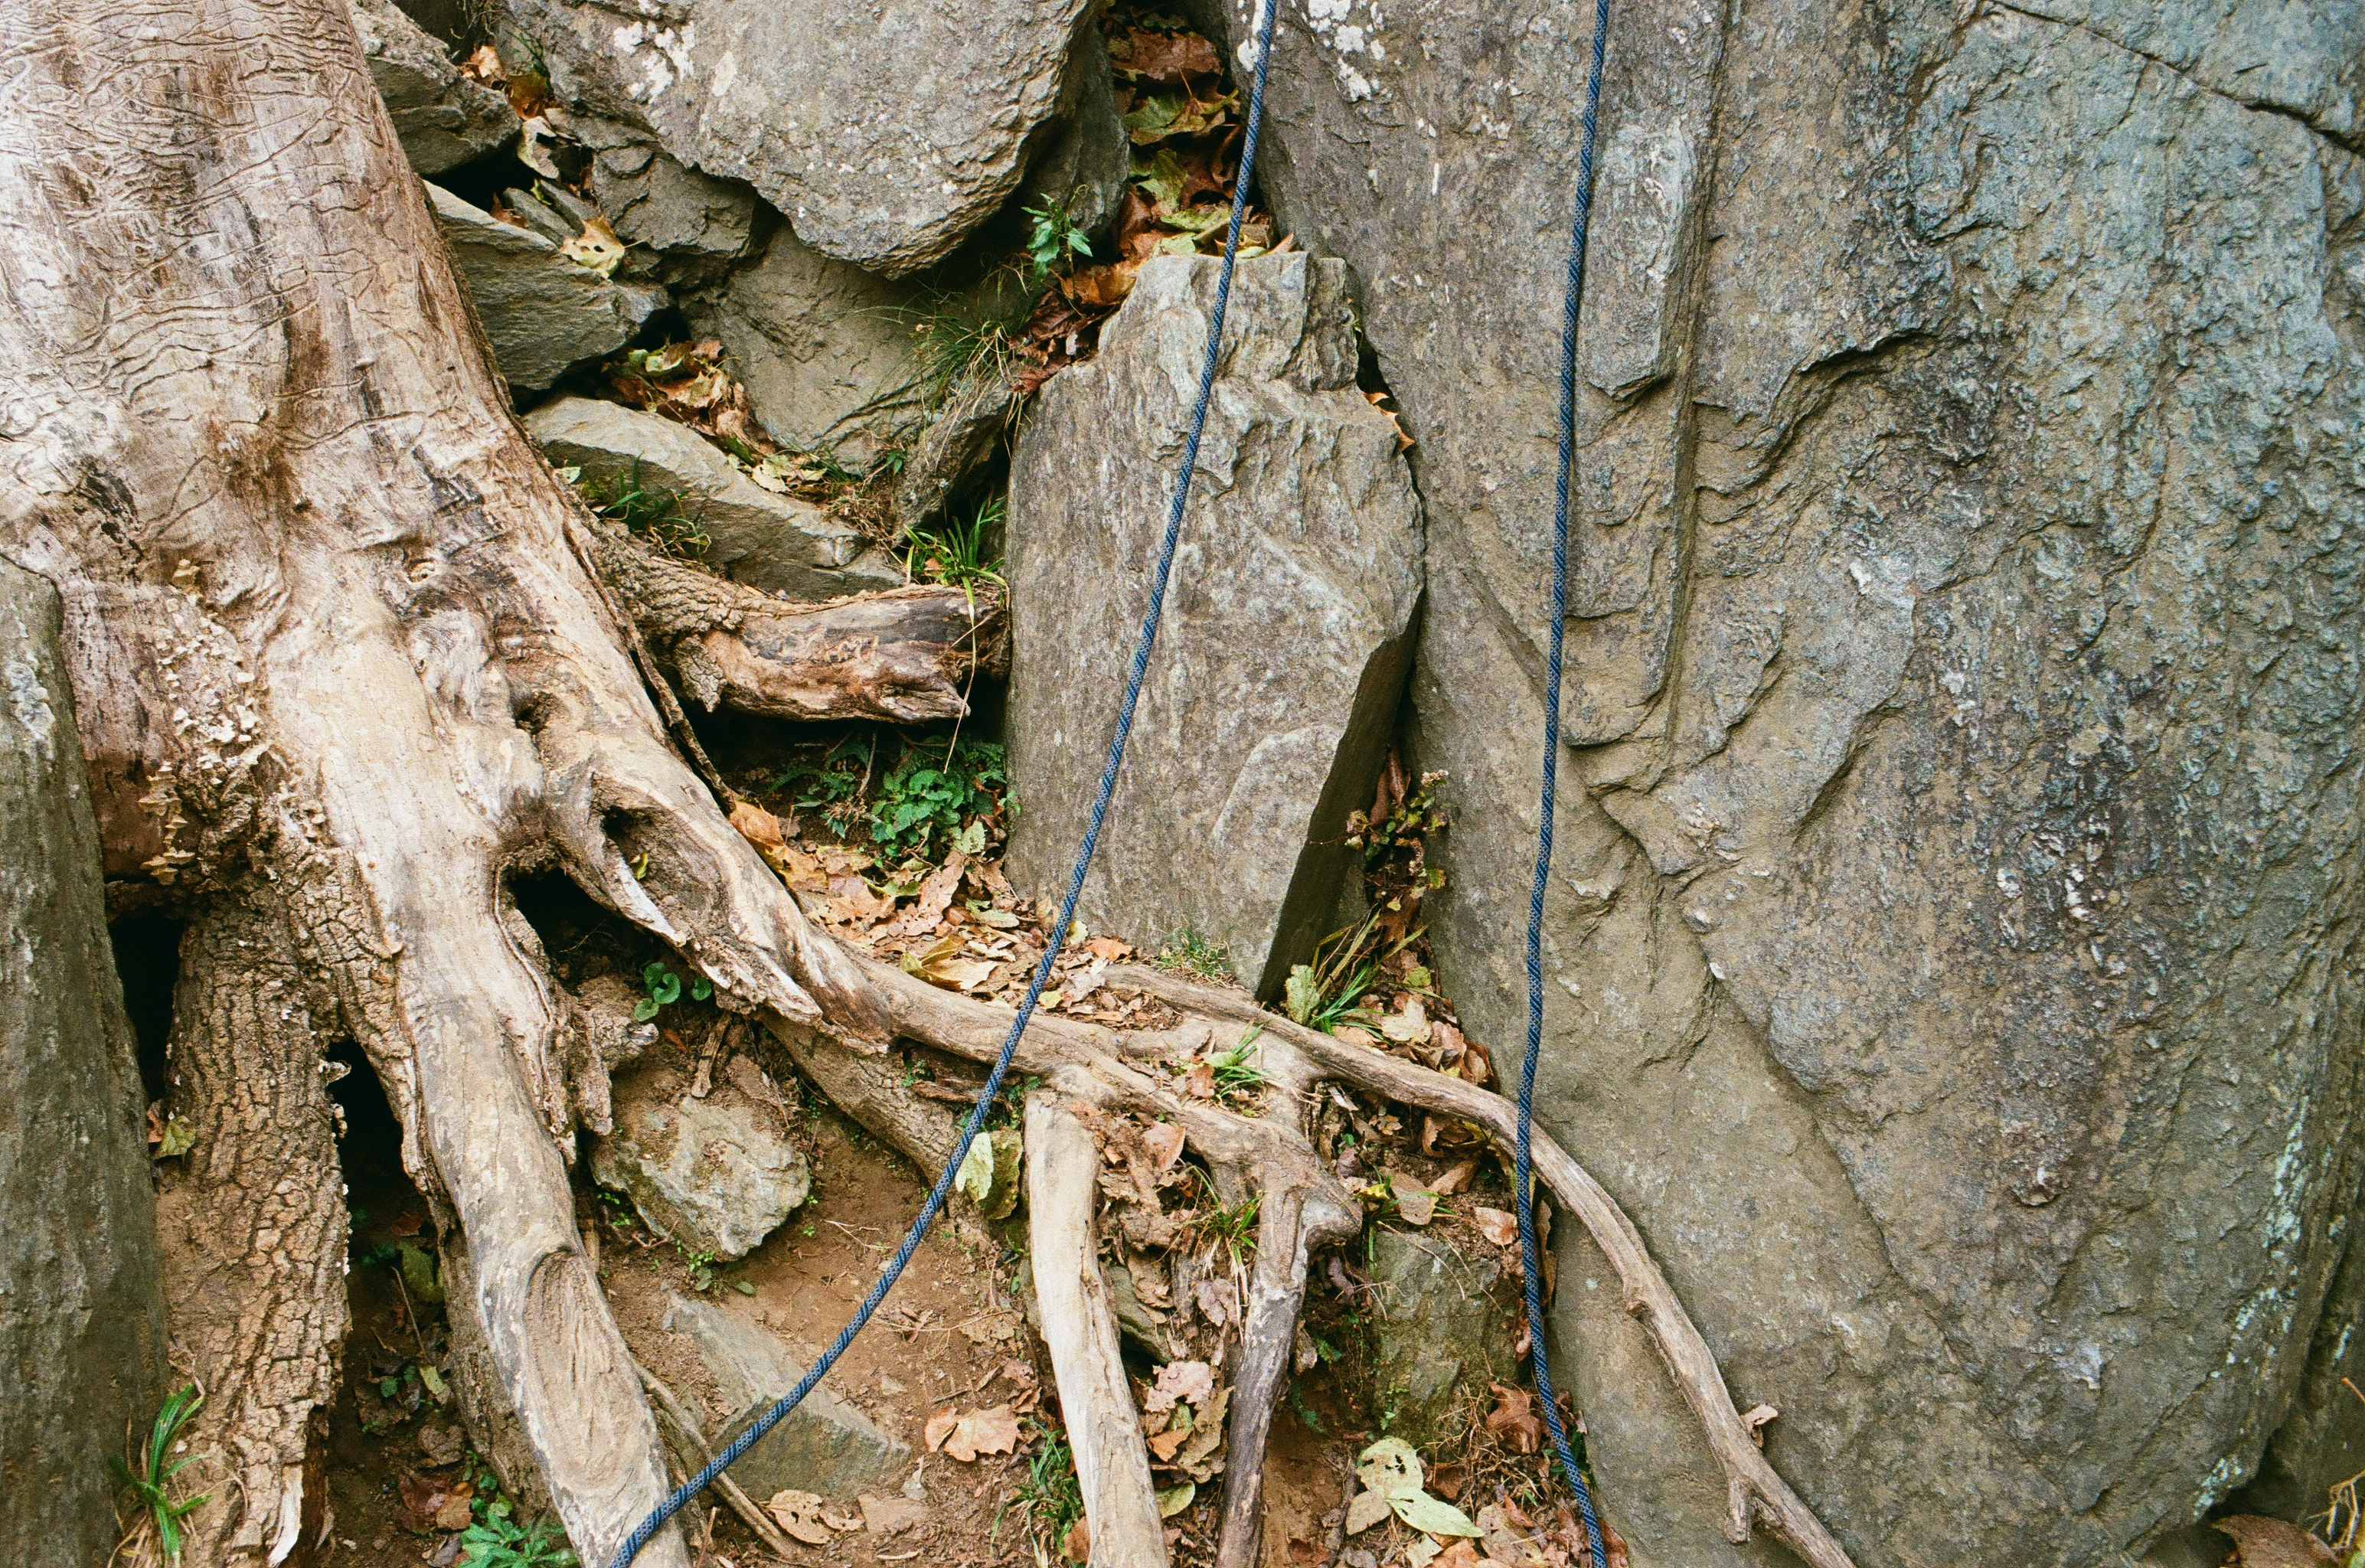 Picture of climbing rope around rock formation.